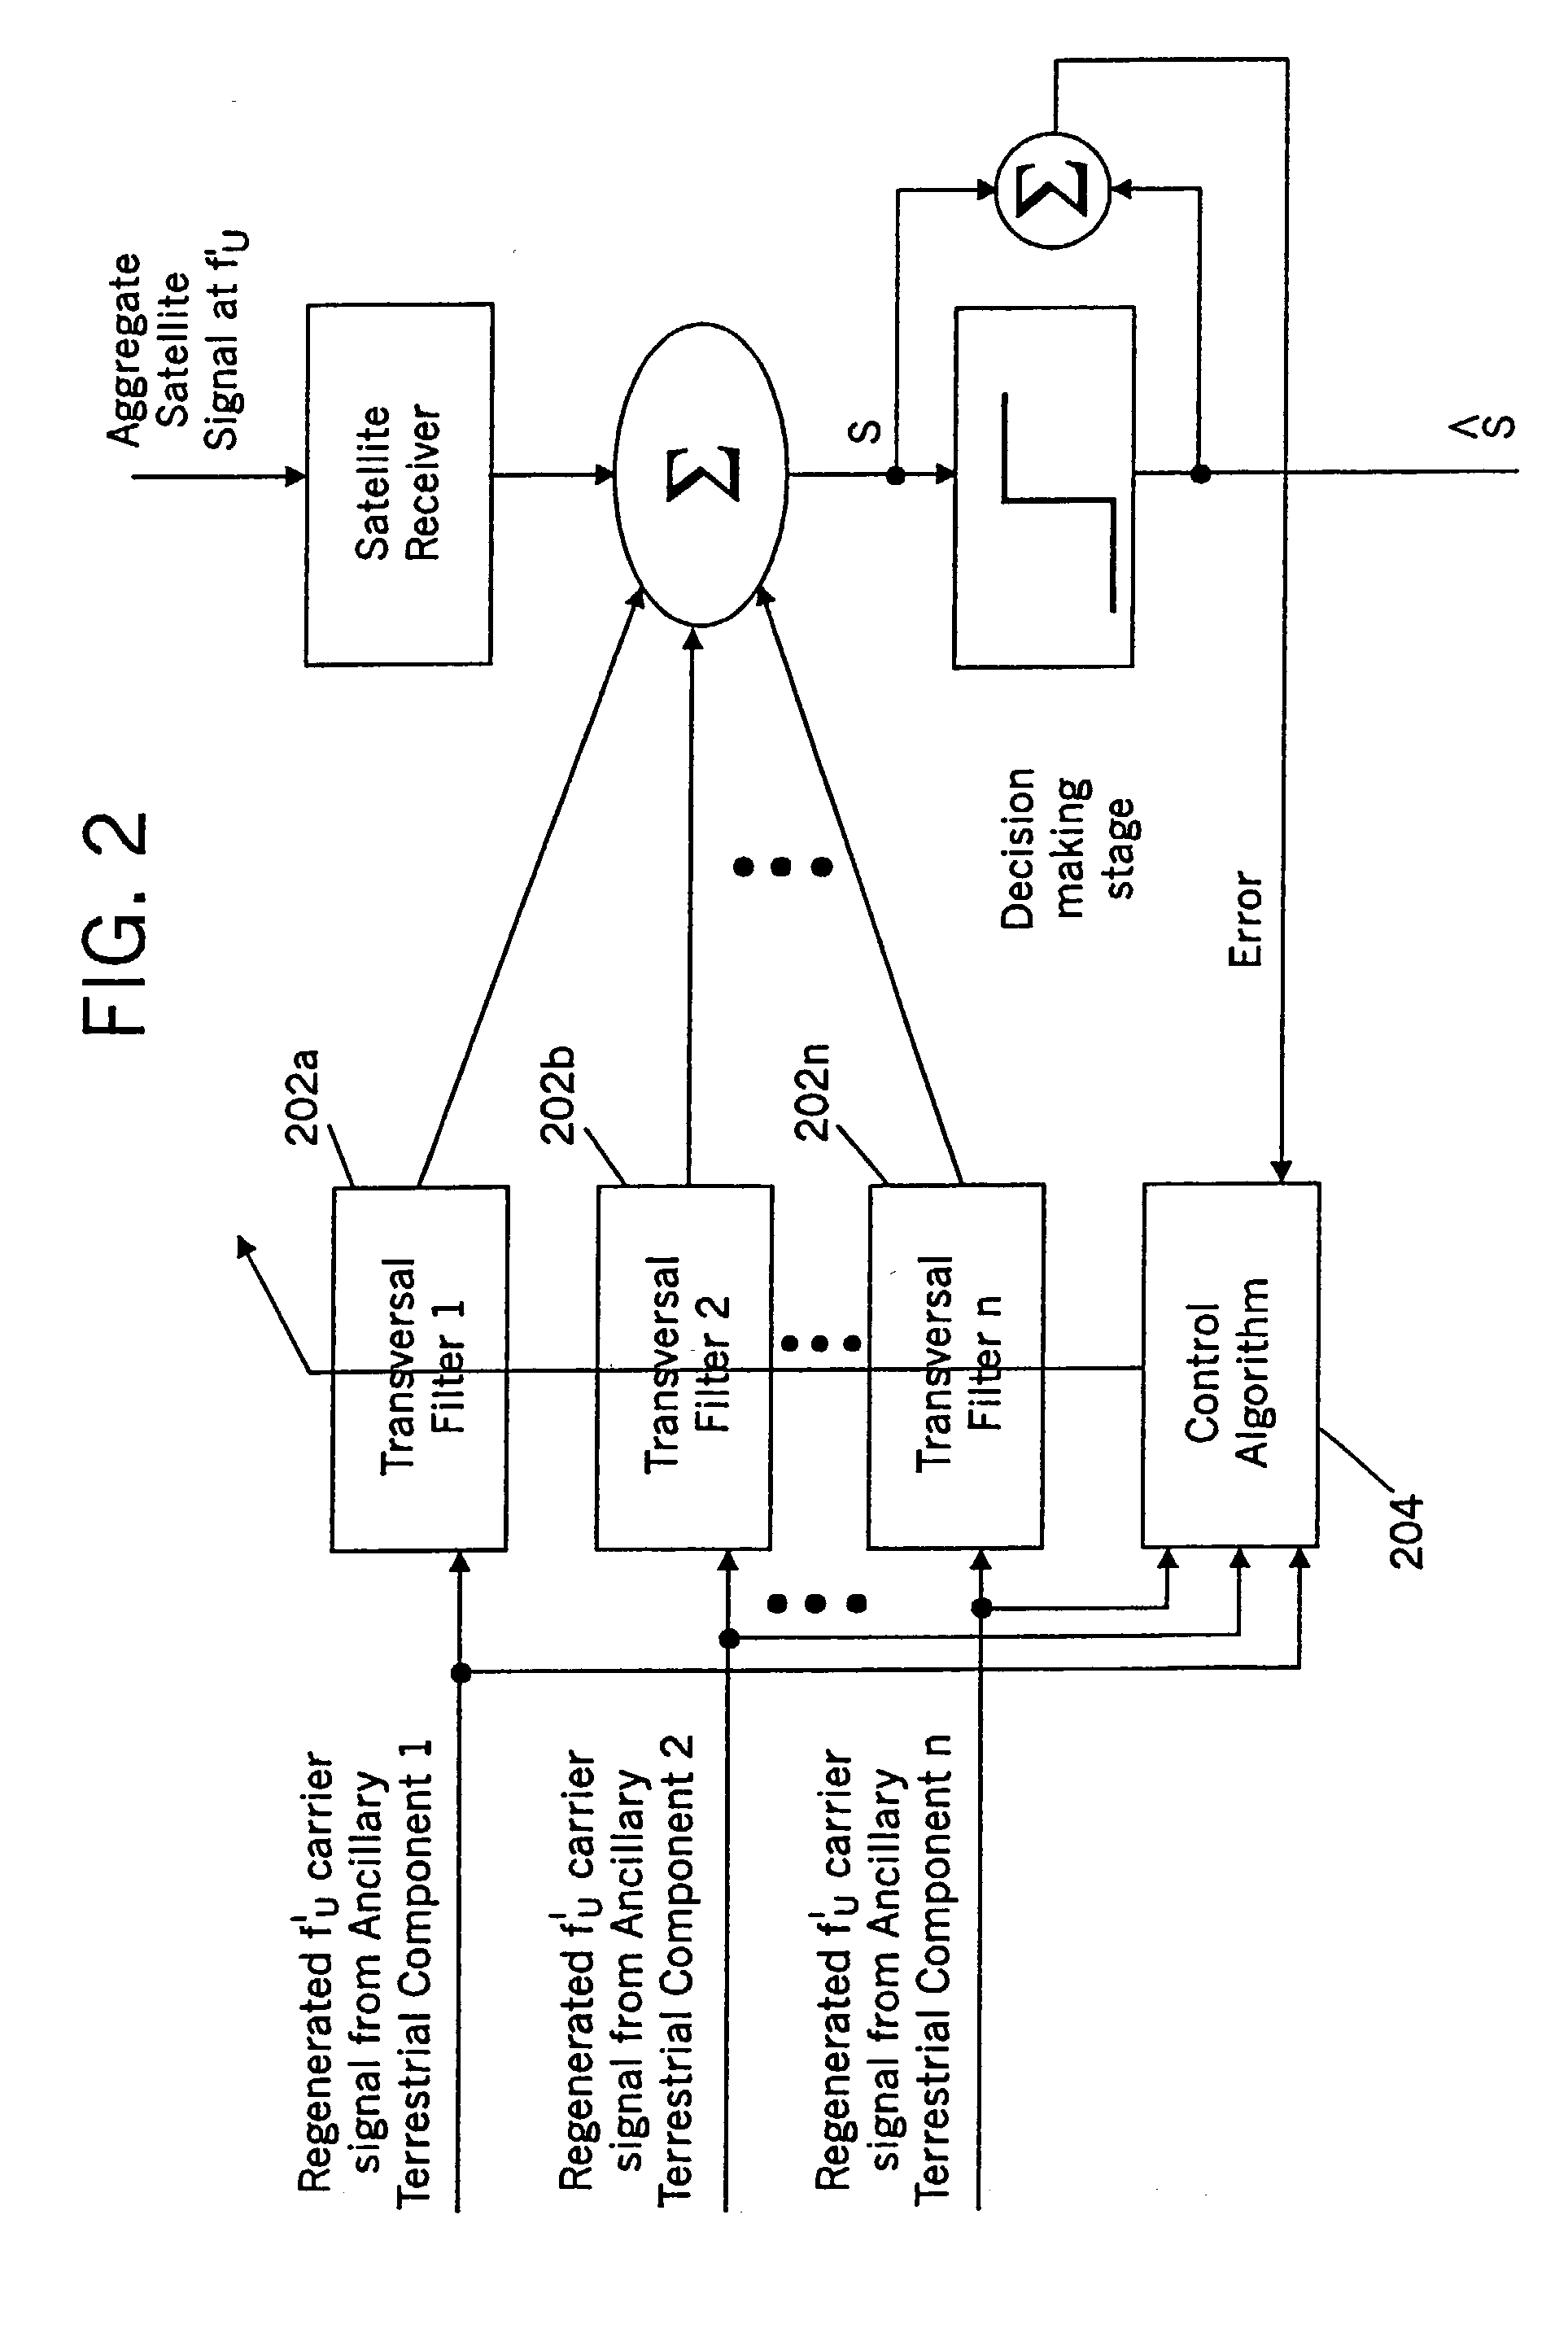 Additional systems and methods for monitoring terrestrially reused satellite frequencies to reduce potential interference